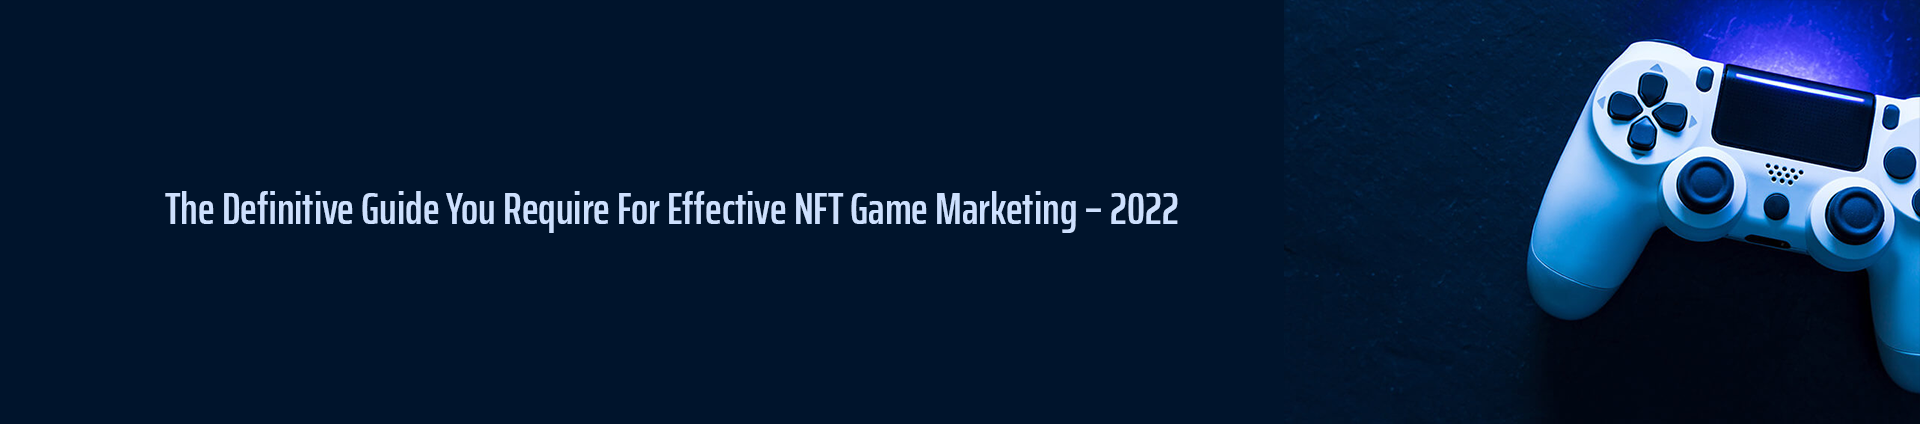 Guide On NFT Game Marketing 2022